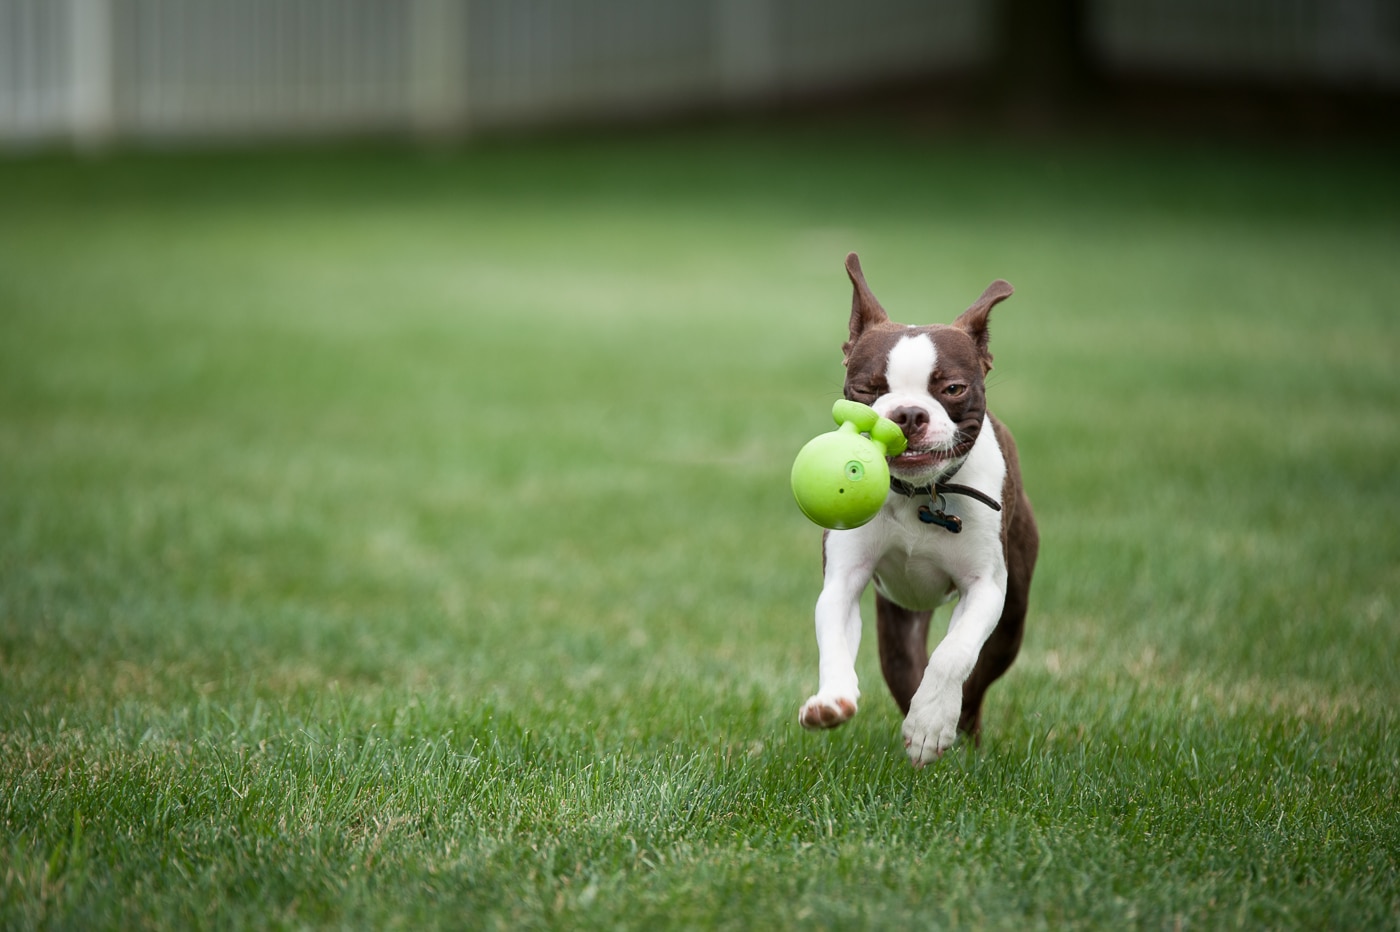 High shutter speed used to capture a dog catching a toy. 